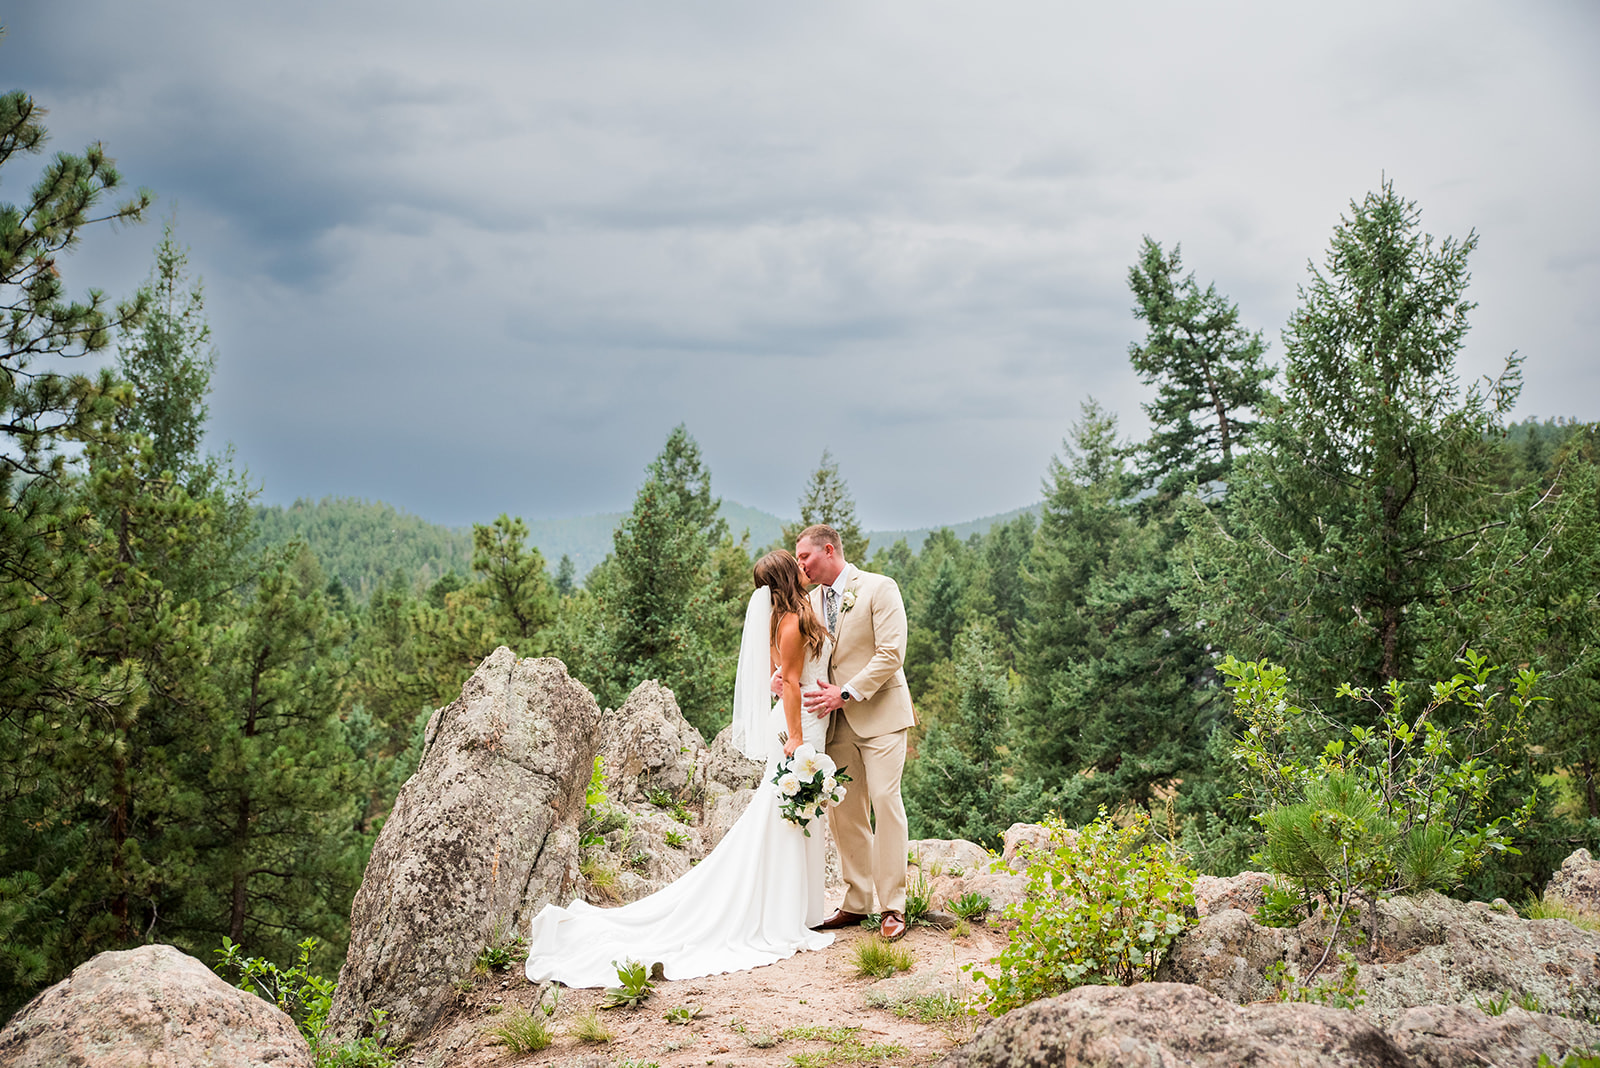 Bride and groom share a kiss on a mountain edge with greenery in the background.